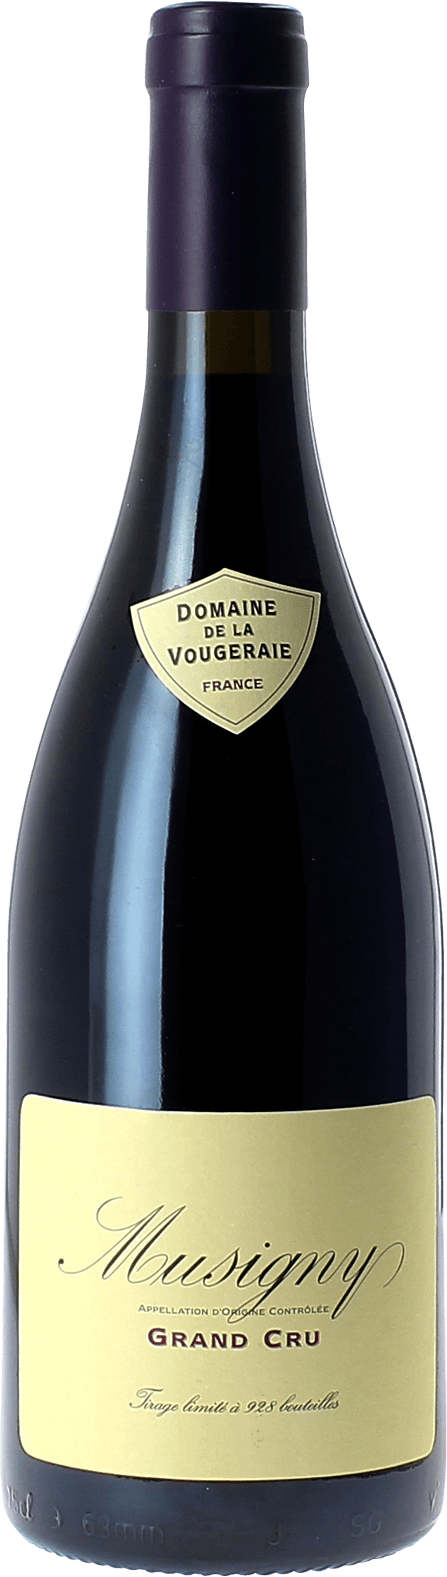 Musigny grand cru 2019 Domaine VOUGERAIE, Bourgogne rouge